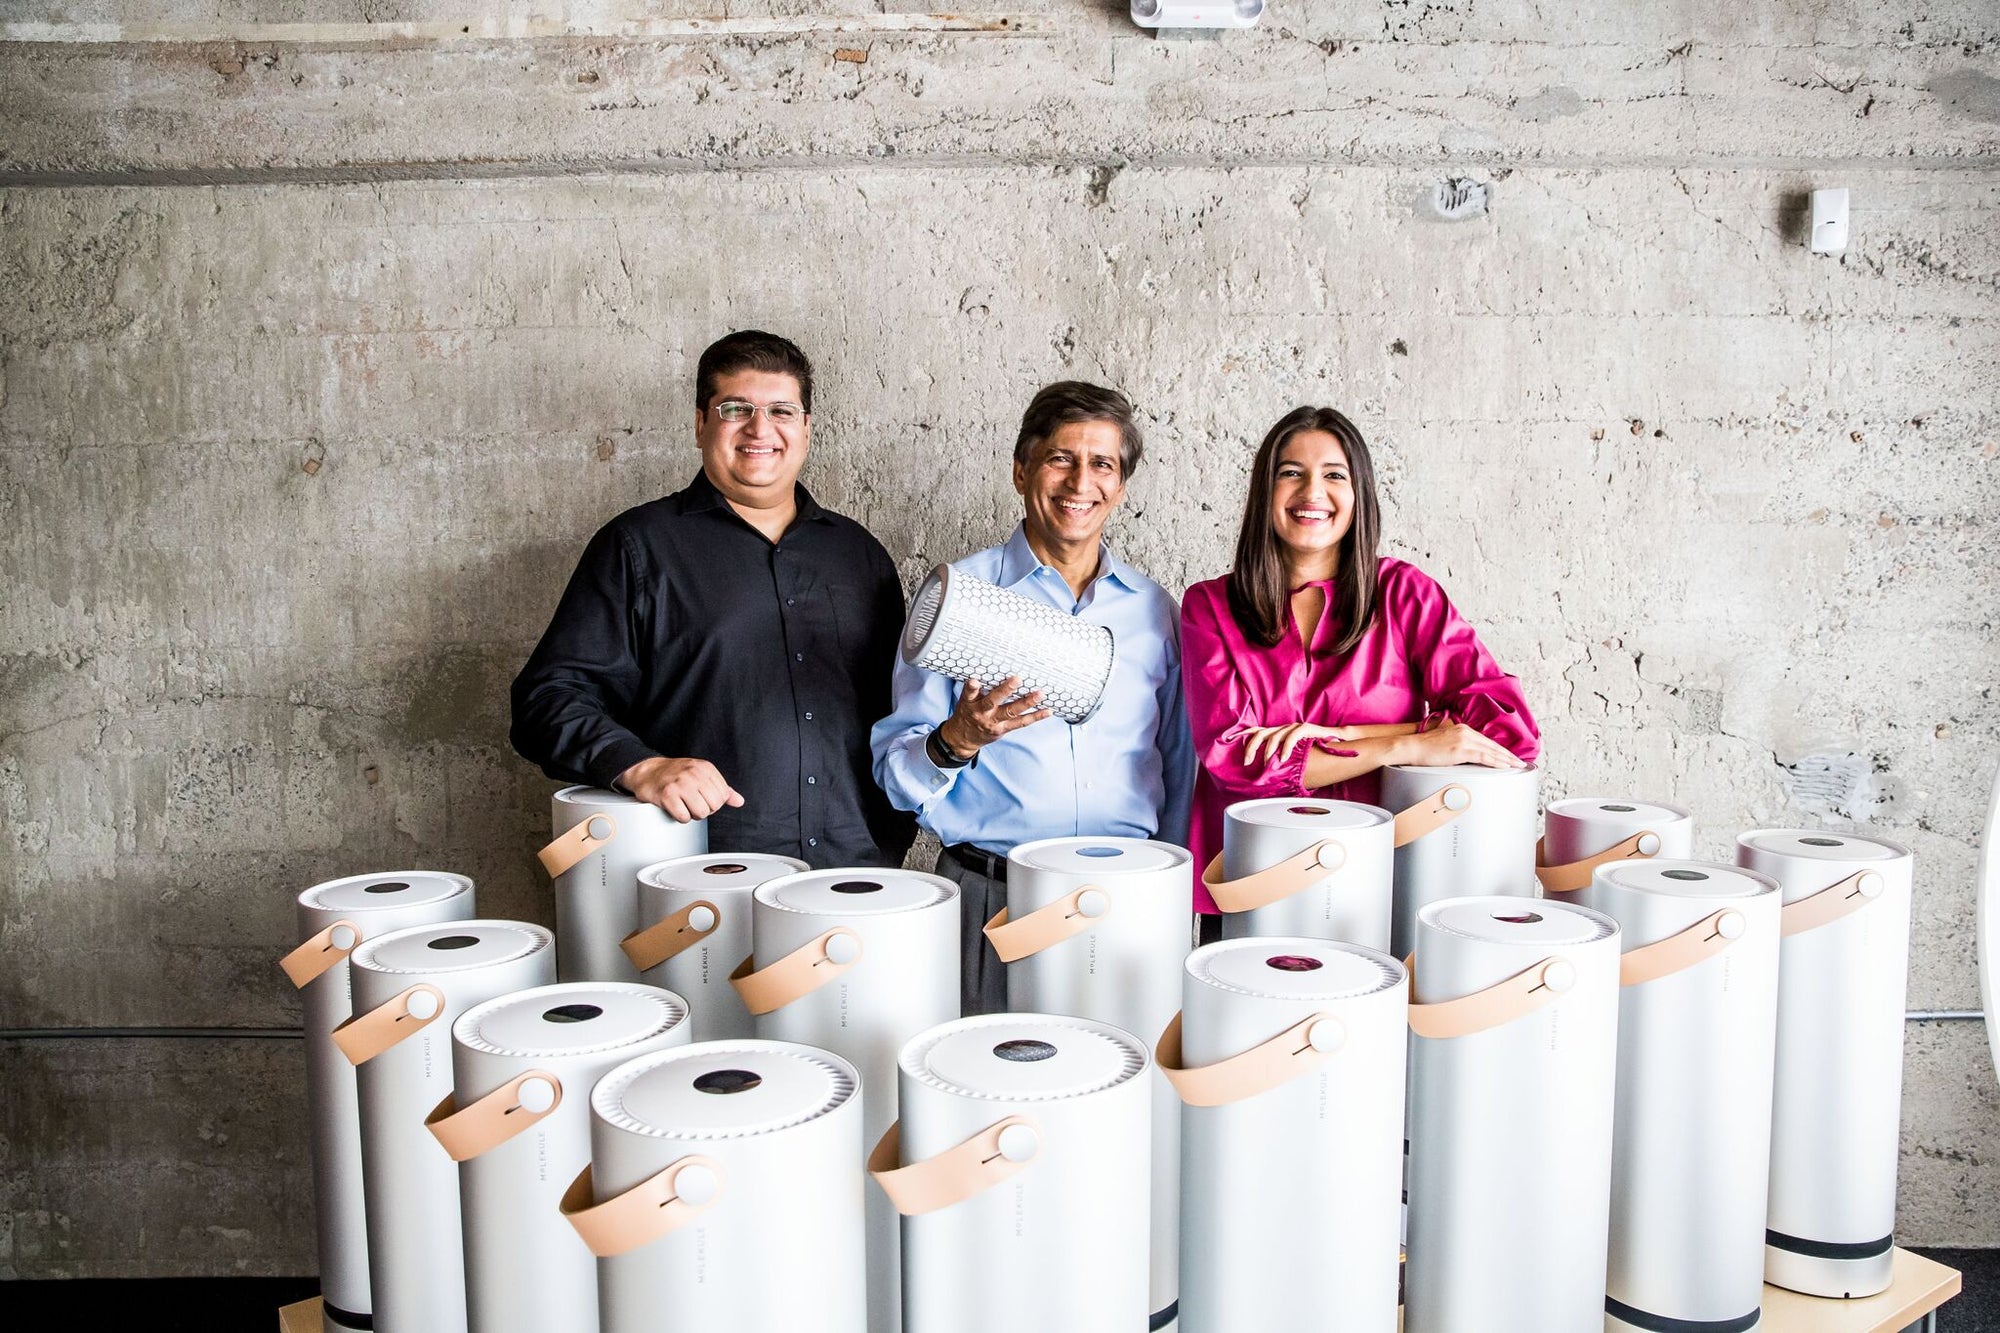 The Goswami family with Molekule air purifiers